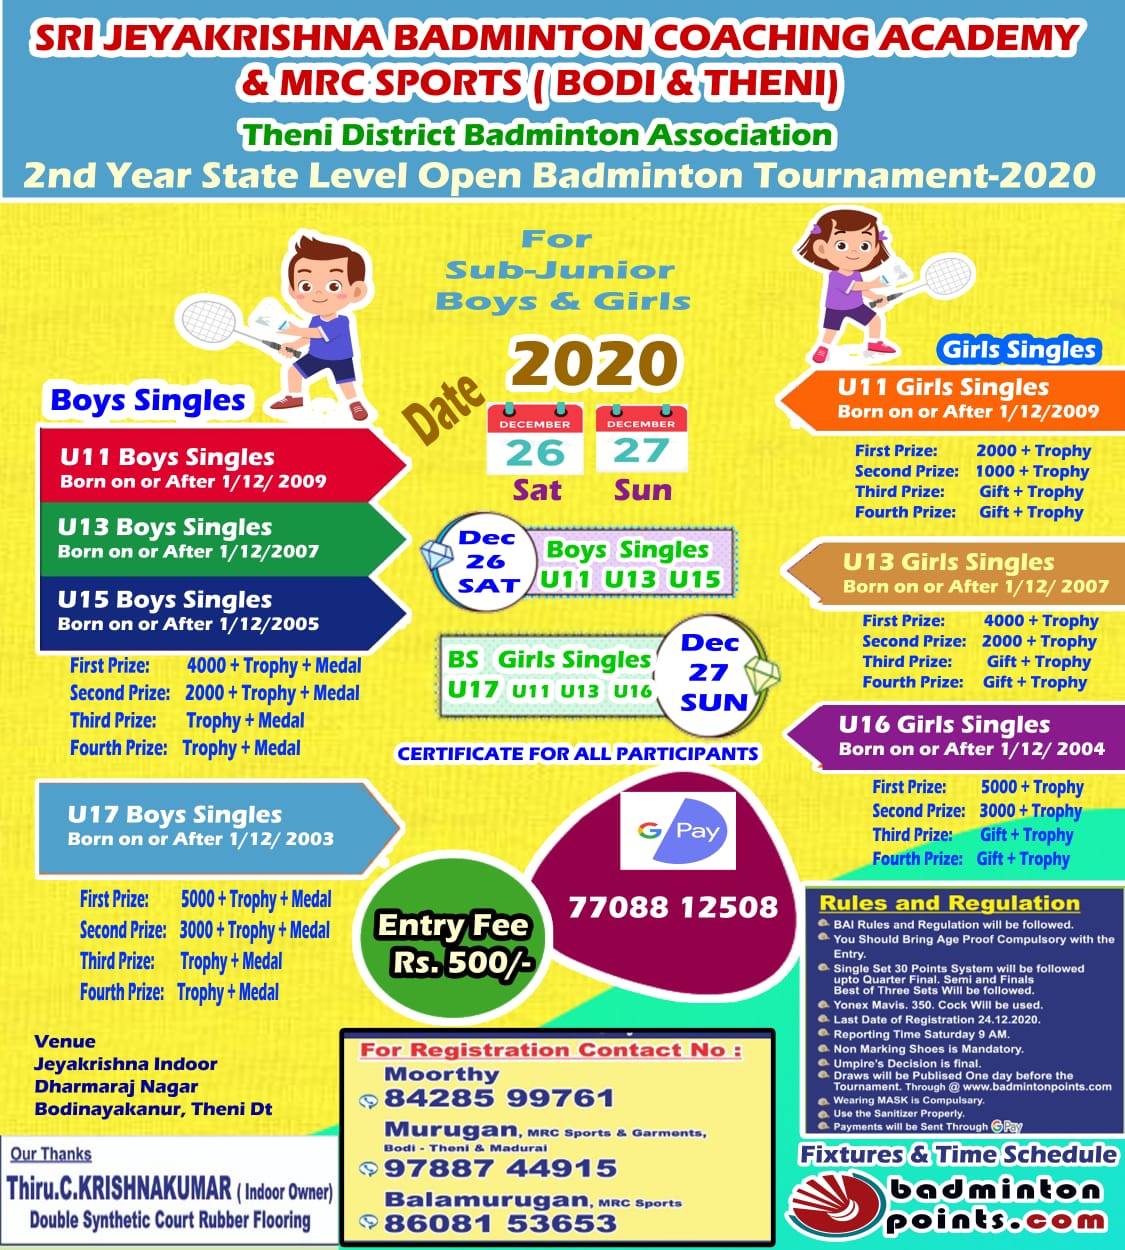 2ND YEAR STATE LEVEL OPEN BADMINTON TOURNAMENT FOR SUB-JUNIOR BOYS & GIRLS SINGLES-2020